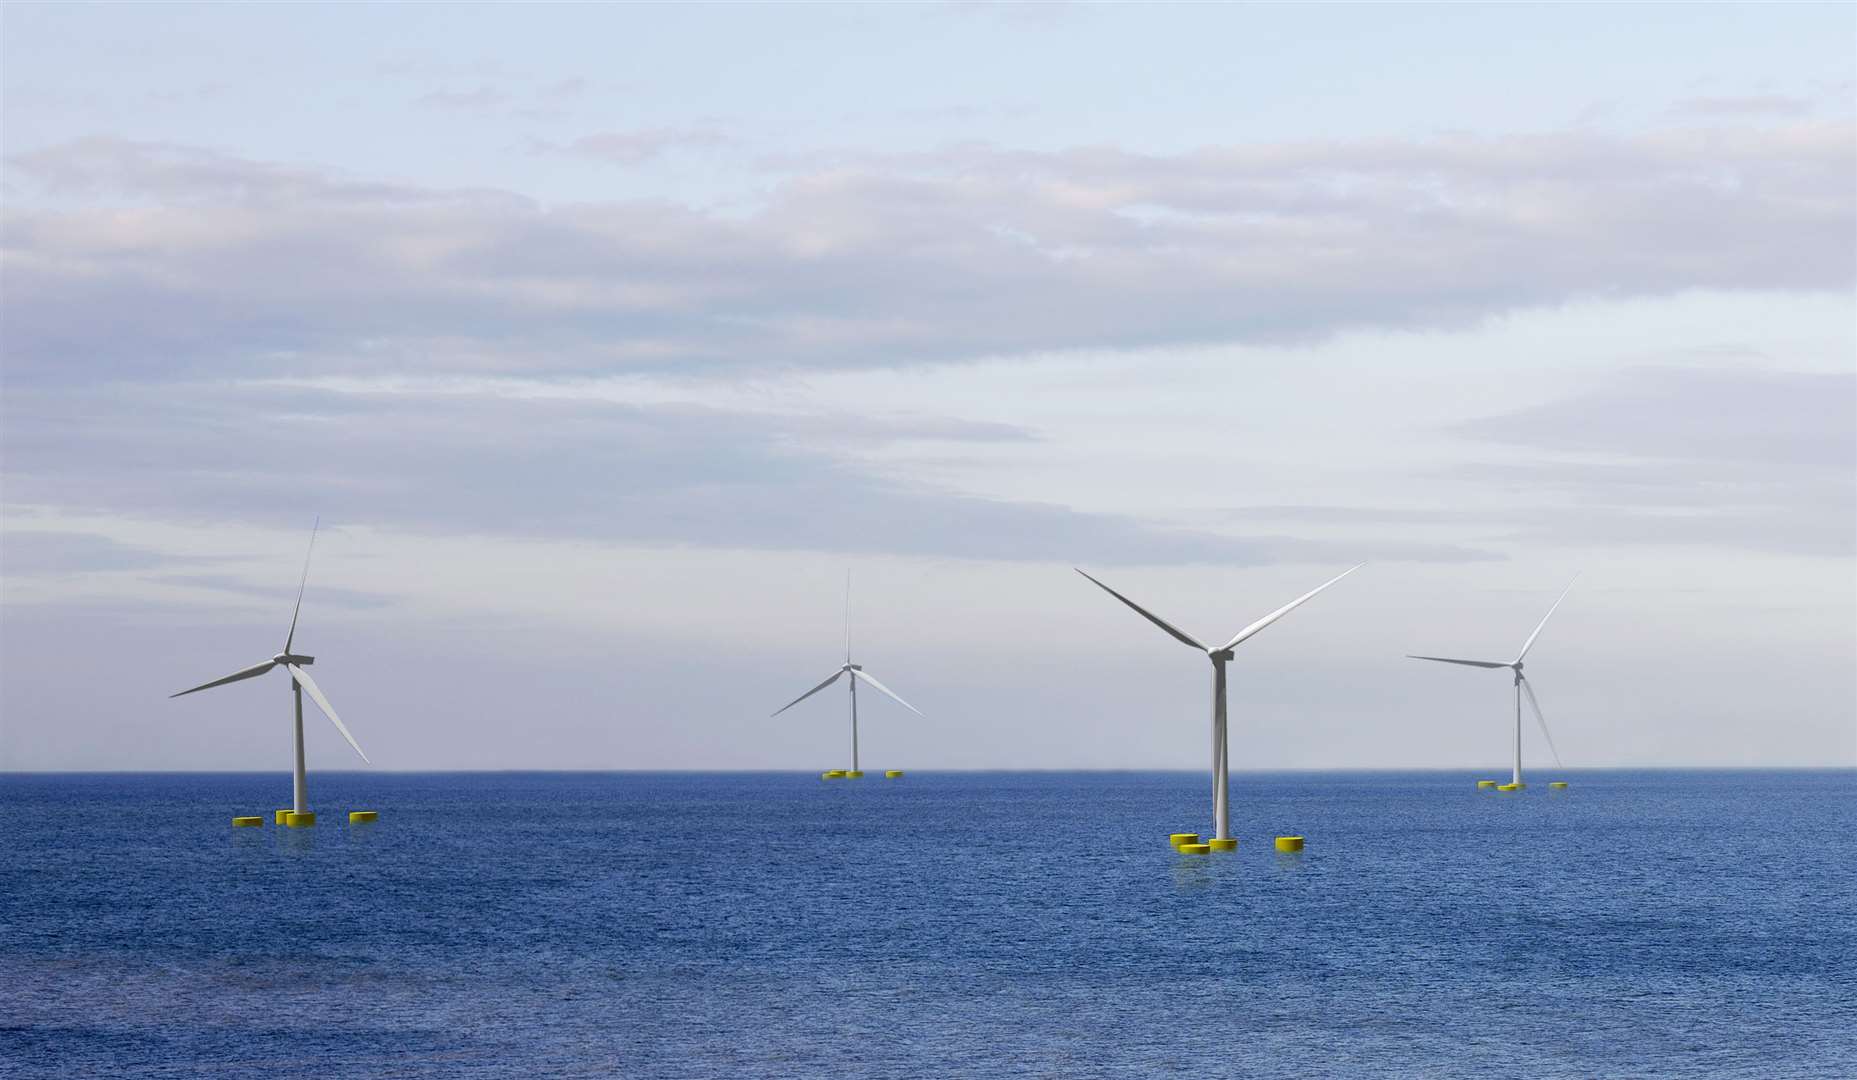 The proposed Pentland Floating Offshore Wind Farm will consist of seven turbines up to 300m high to their blade tips.